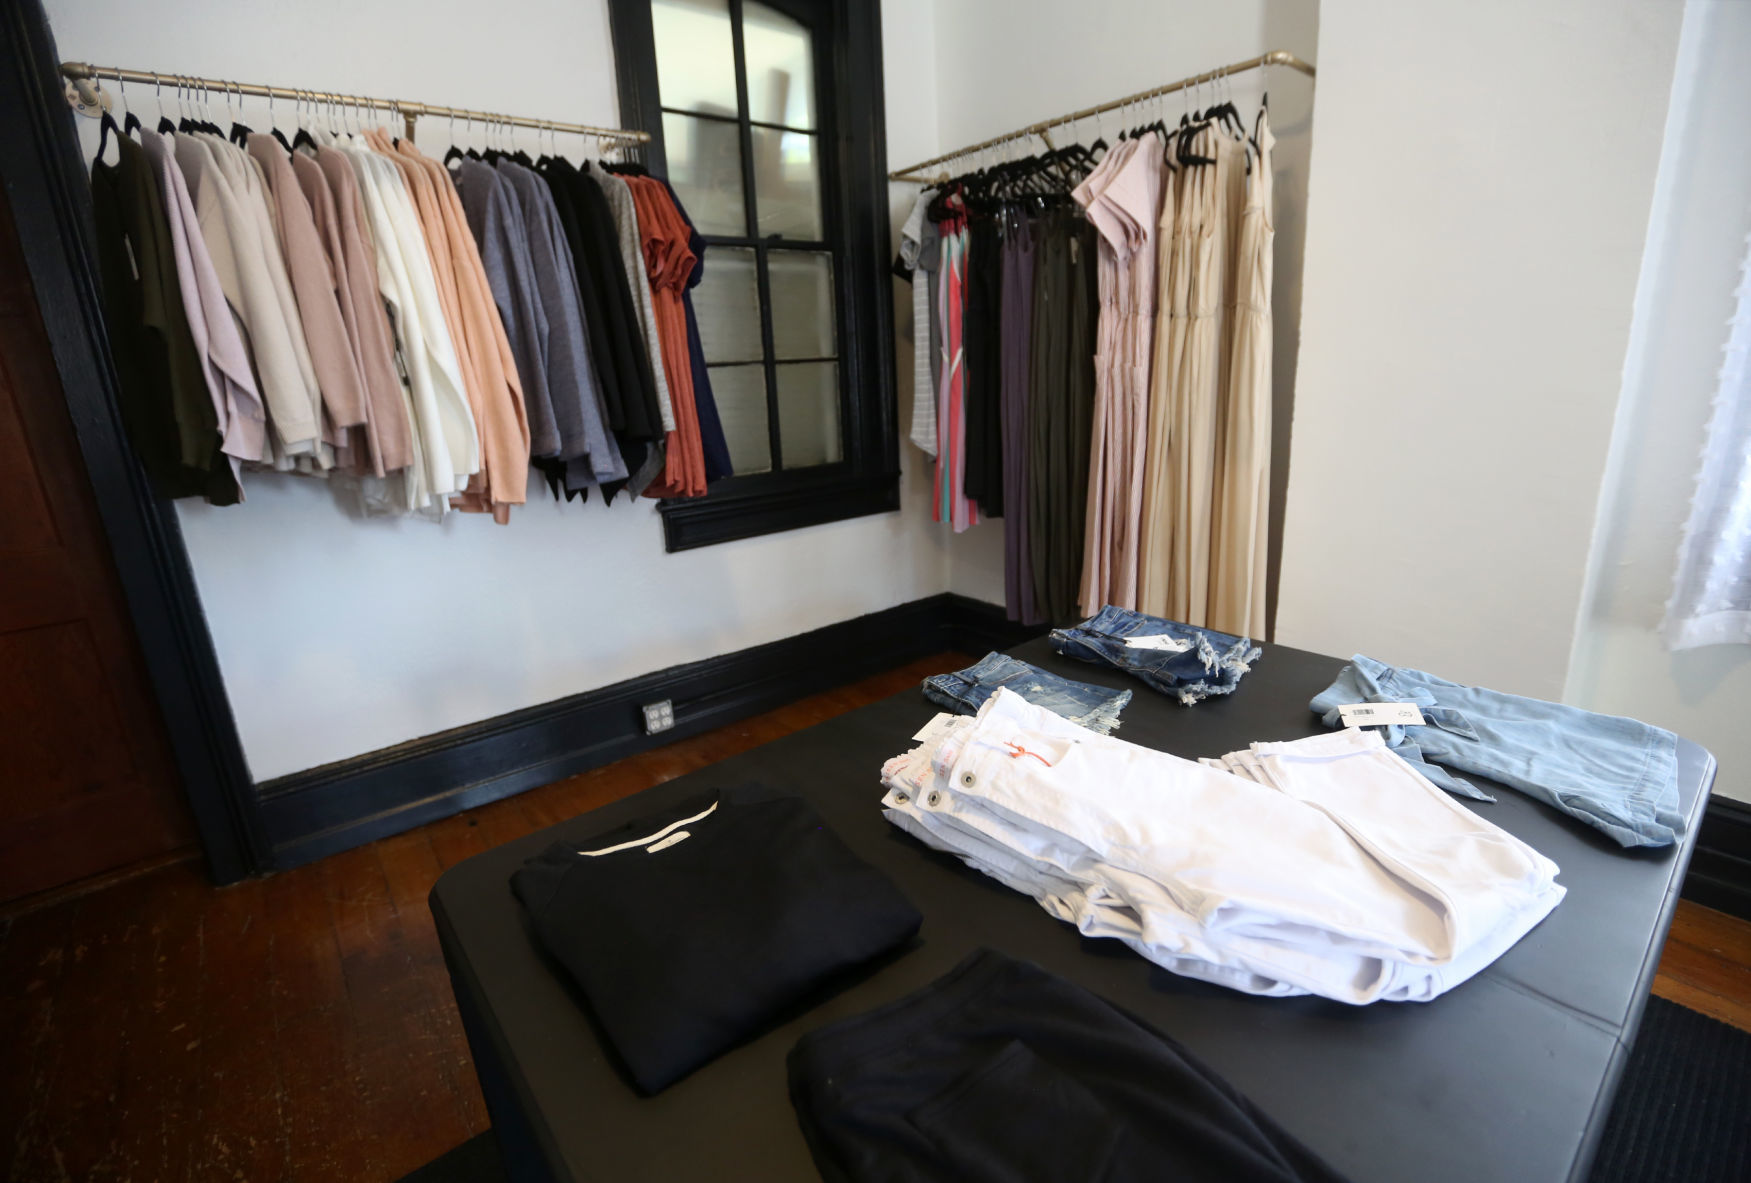 Clothes are displayed at You. Boutique at 471 W. Fourth St. in Dubuque on Thursday, June 11, 2020.  PHOTO CREDIT: JESSICA REILLY